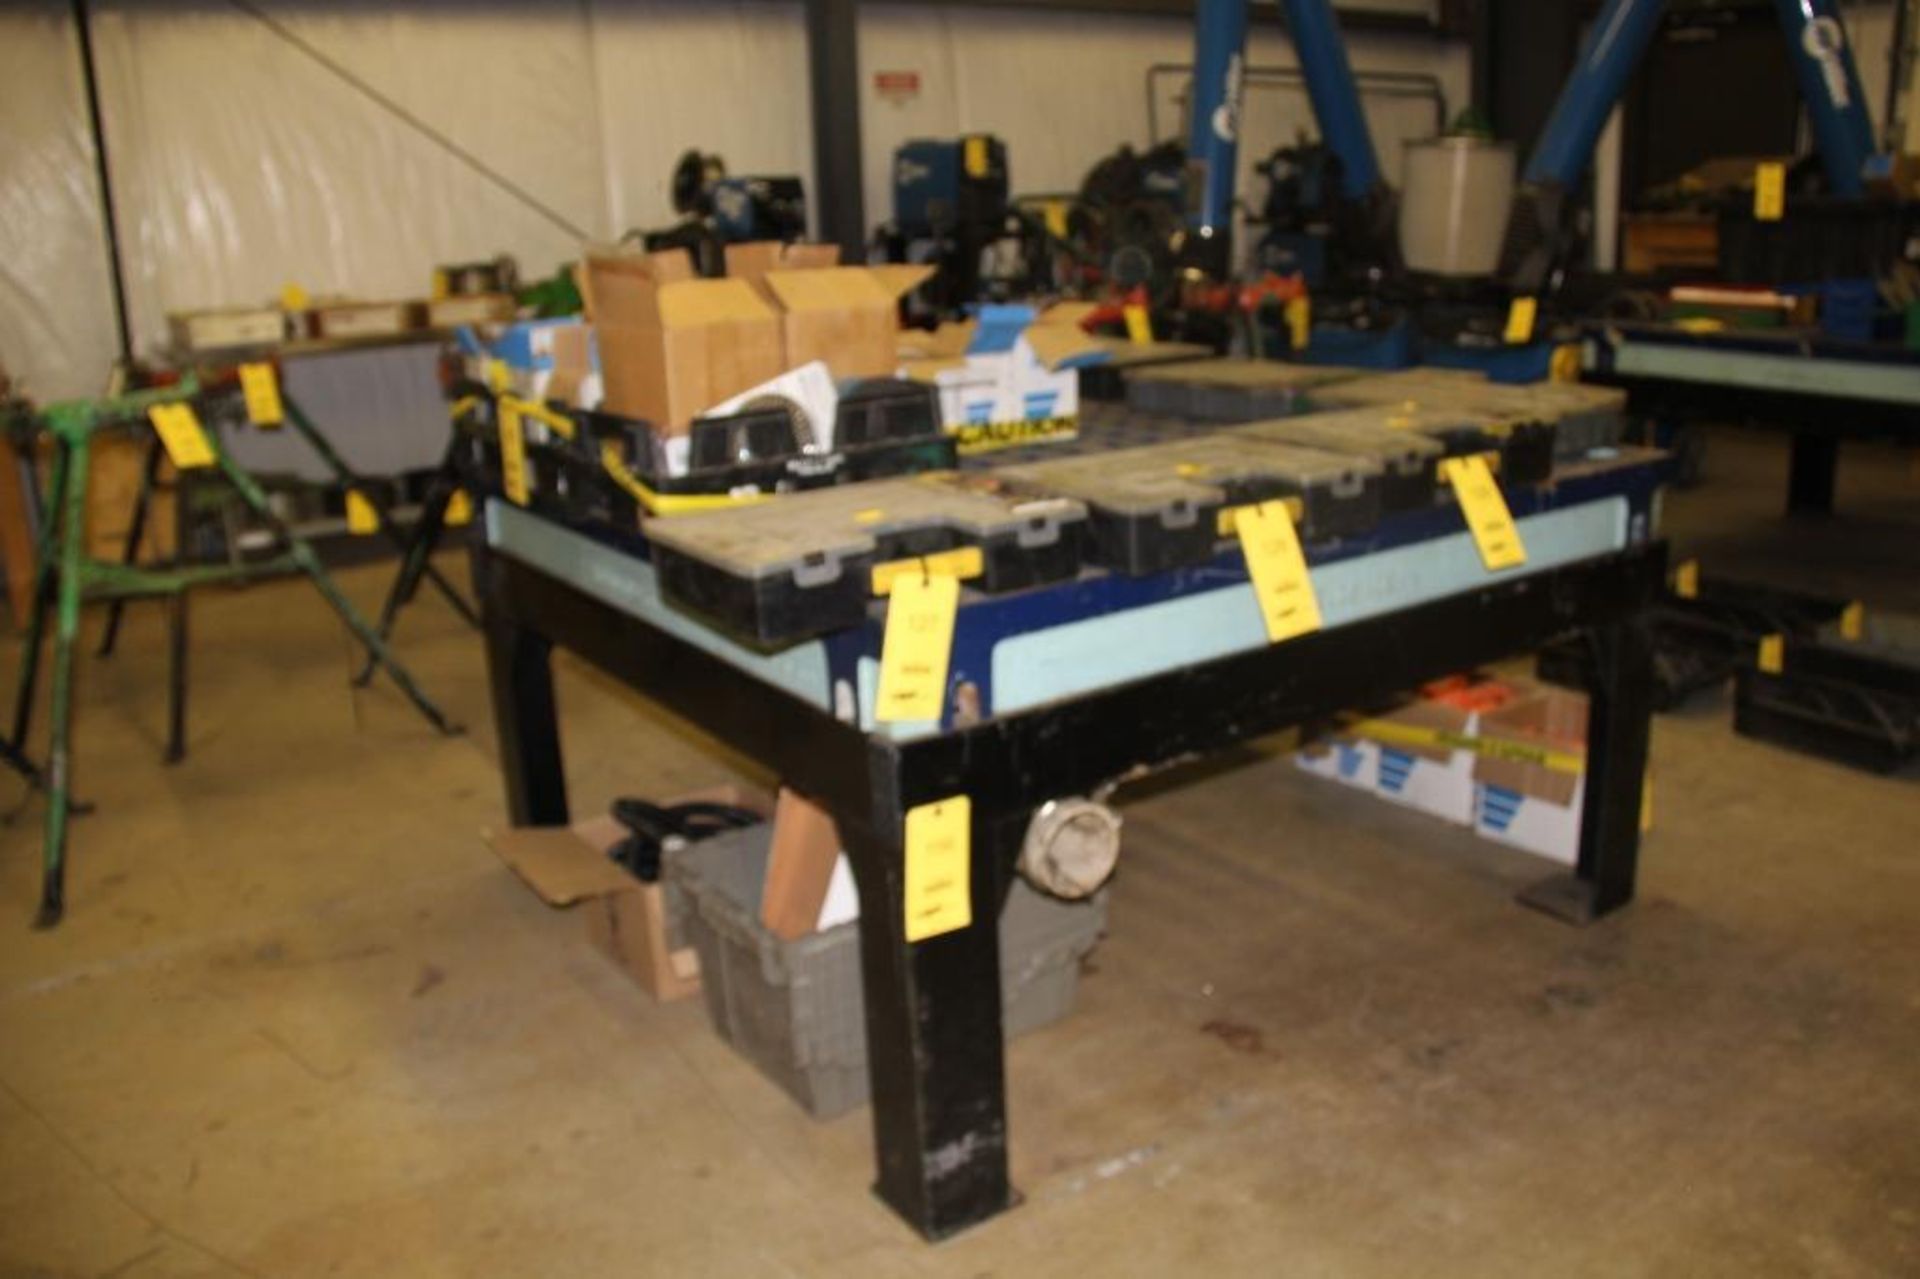 Weldsale 5 ft. x 5 ft. x 32 in. High Welding Table (SALE SUBJECT TO SECURED LENDER'S APPROVAL) - Image 2 of 3